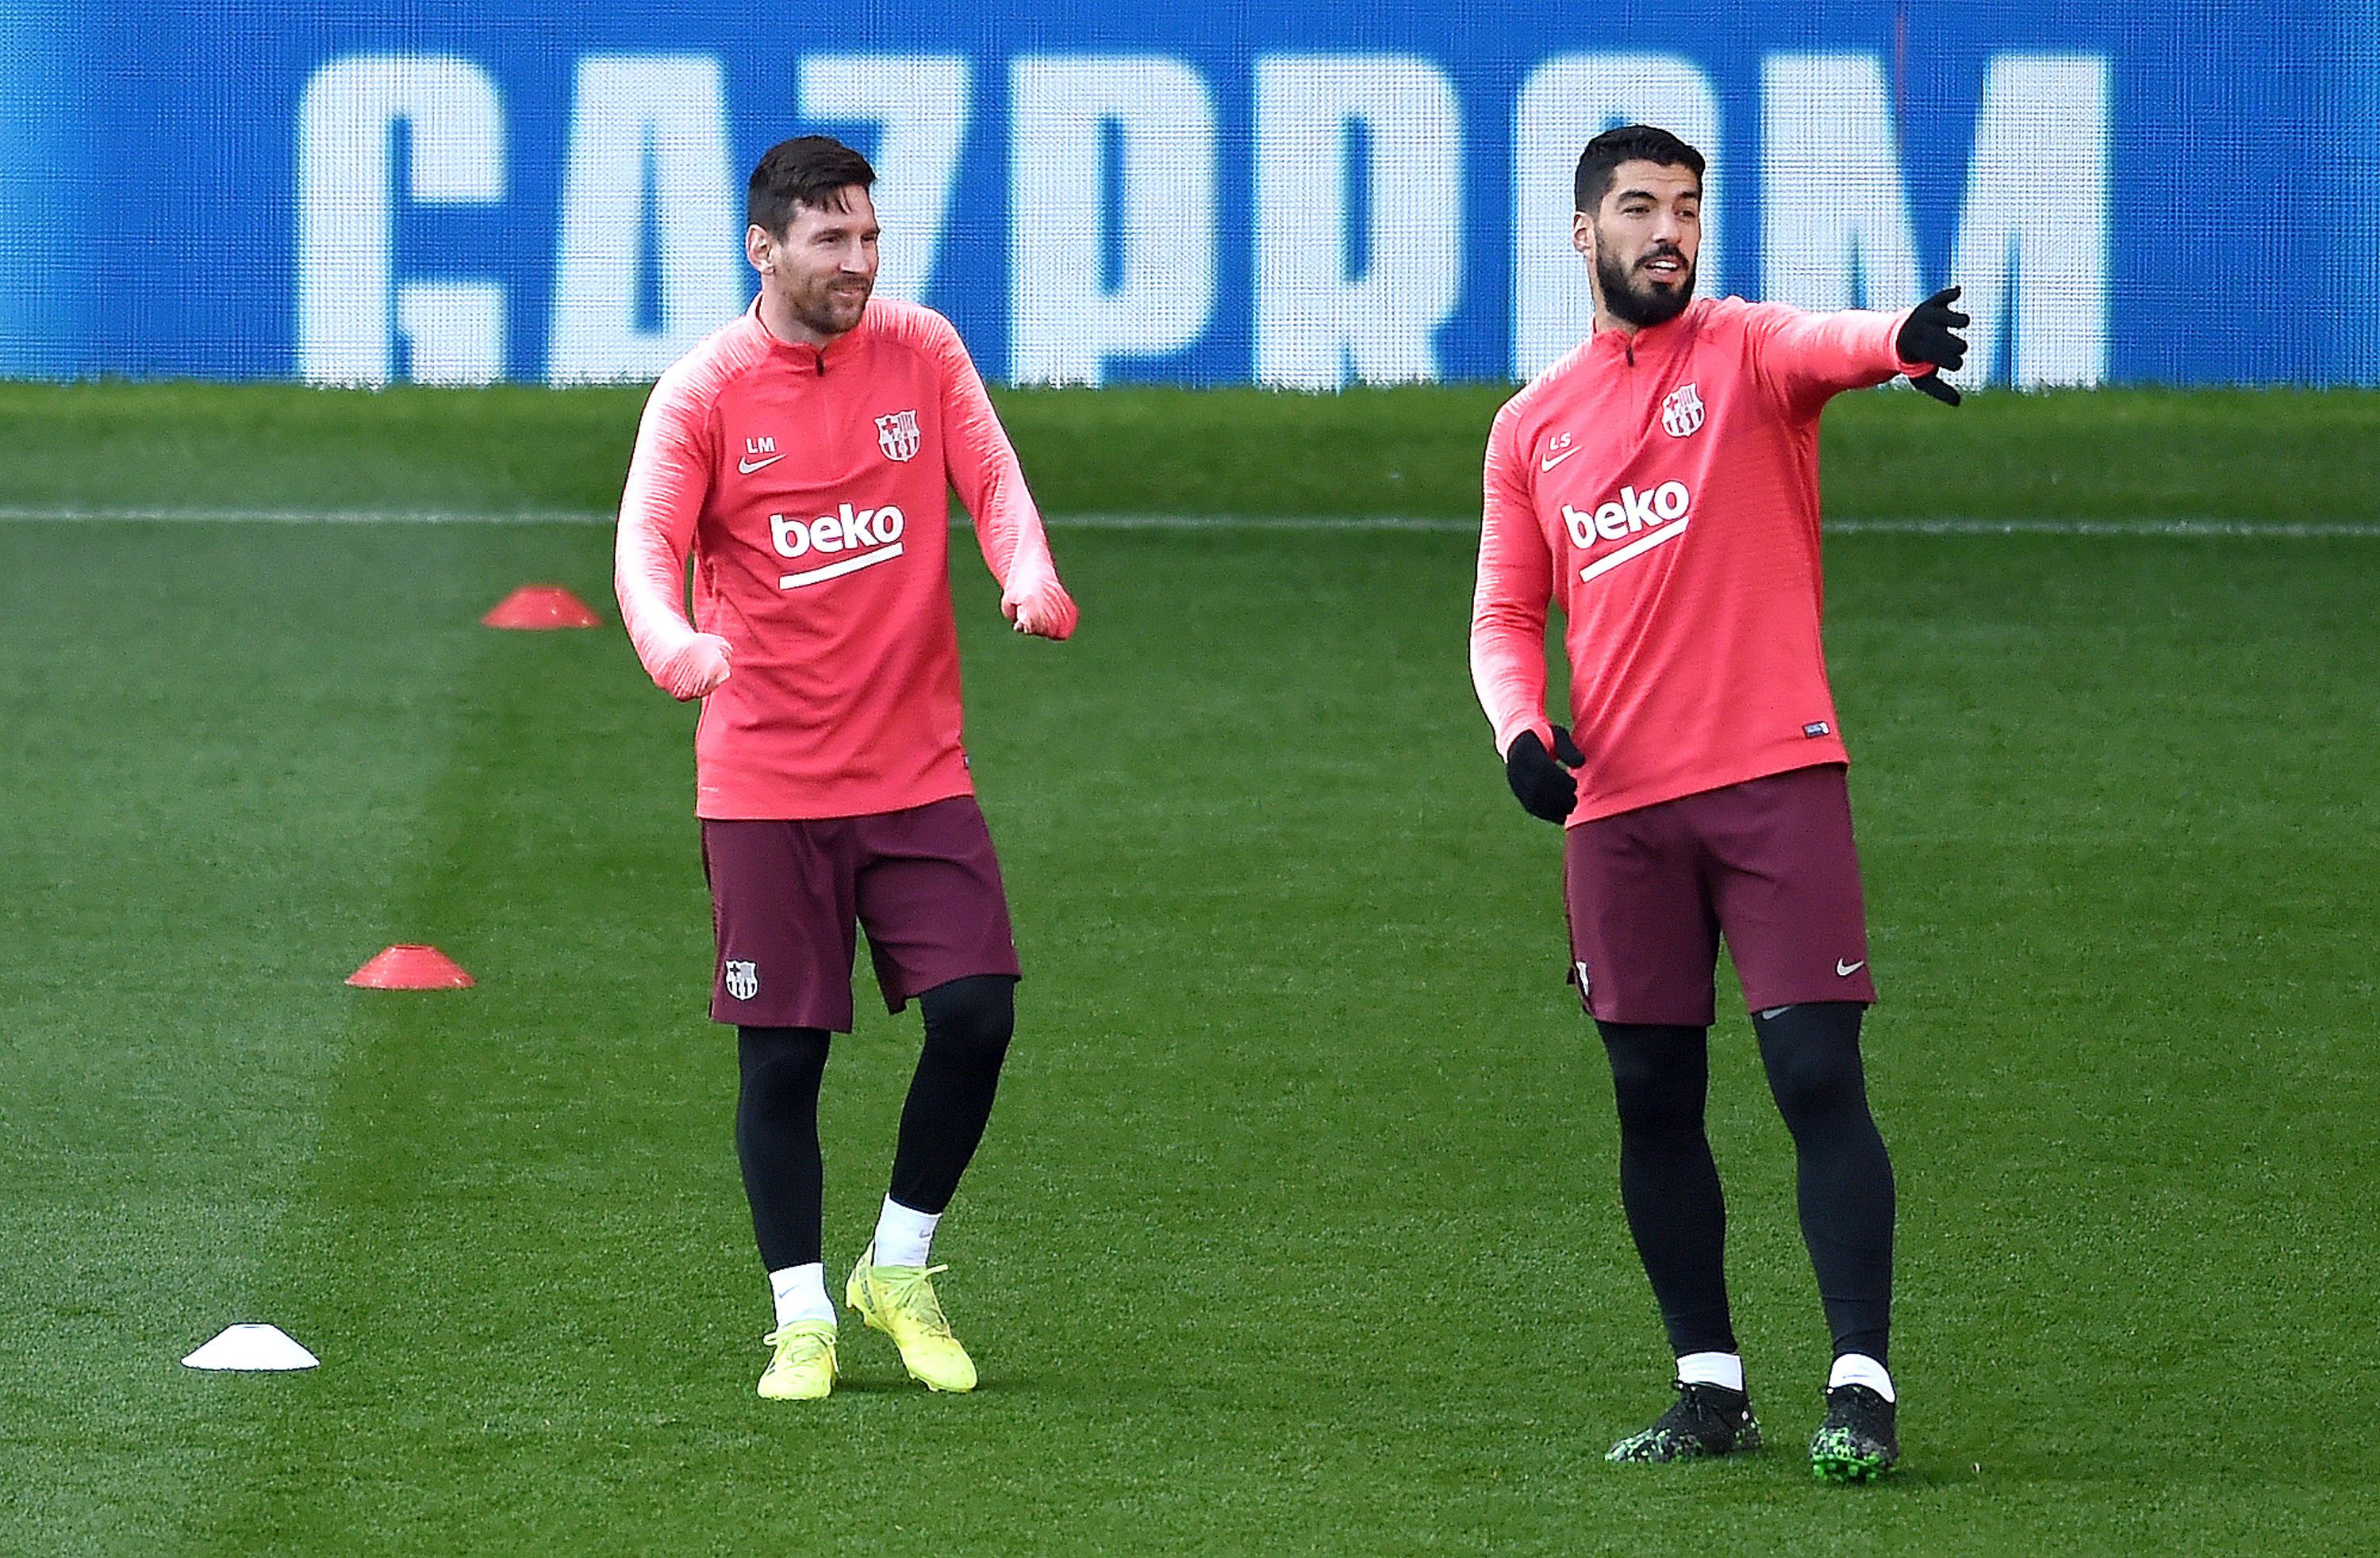 MANCHESTER, ENGLAND - APRIL 09: Lionel Messi and Luis Suarez during a FC Barcelona training session, on the eve of their Champions League Quarter Final match against Manchester United, at Old Trafford on April 09, 2019 in Manchester, England. (Photo by Nathan Stirk/Getty Images)